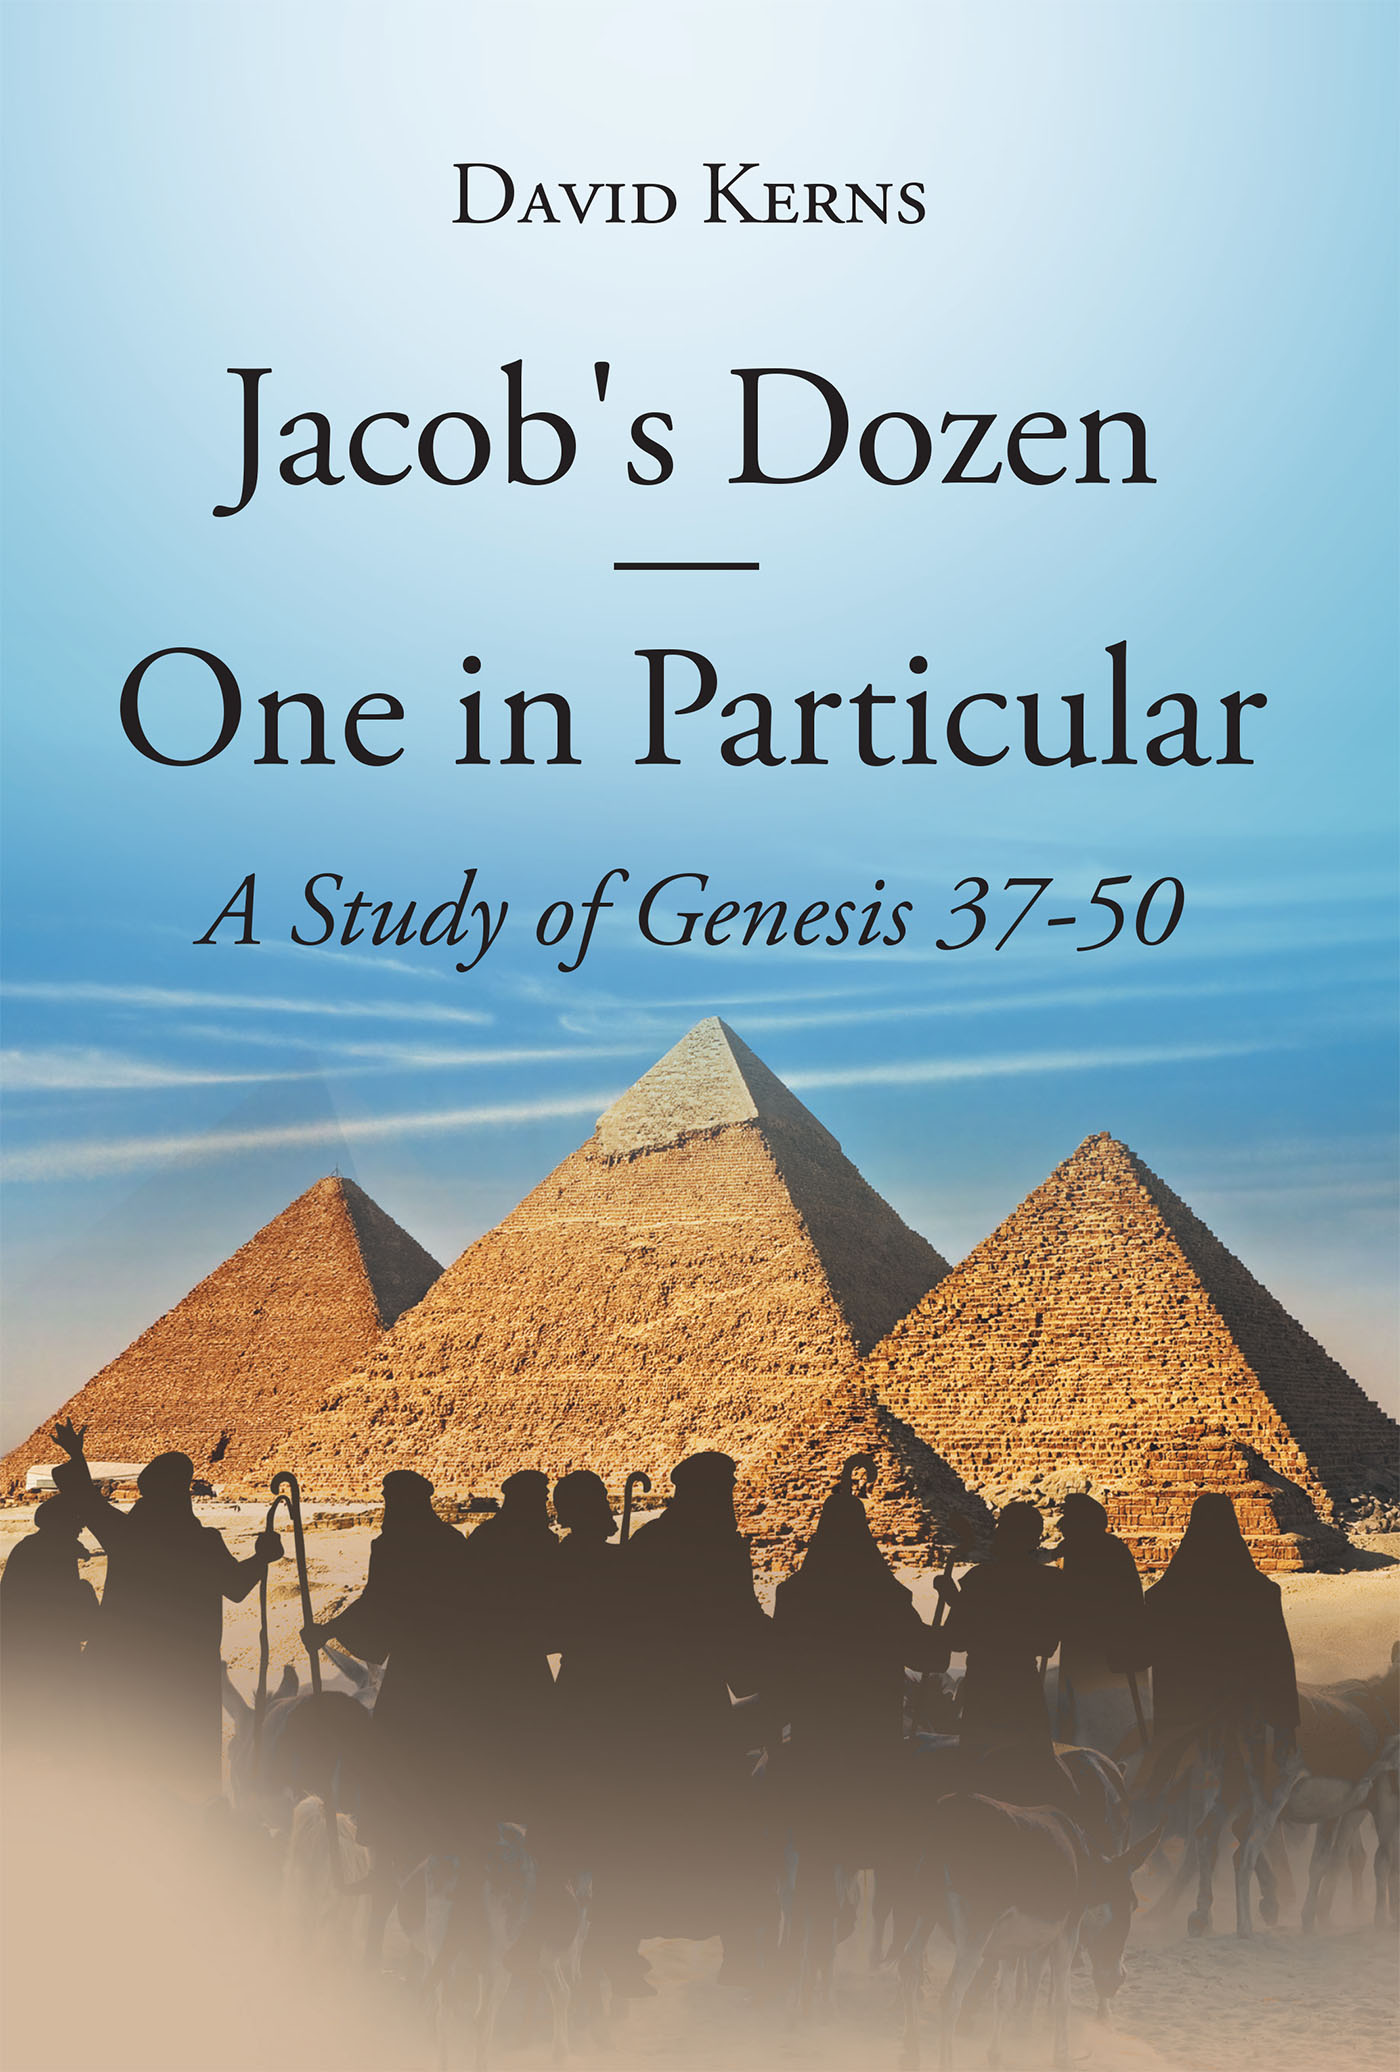 David Kerns’s New Book, "Jacob's Dozen One in Particular: A Study of Genesis 37-50," is an Informative Study of One of the Most Intense Stories from Within the Bible